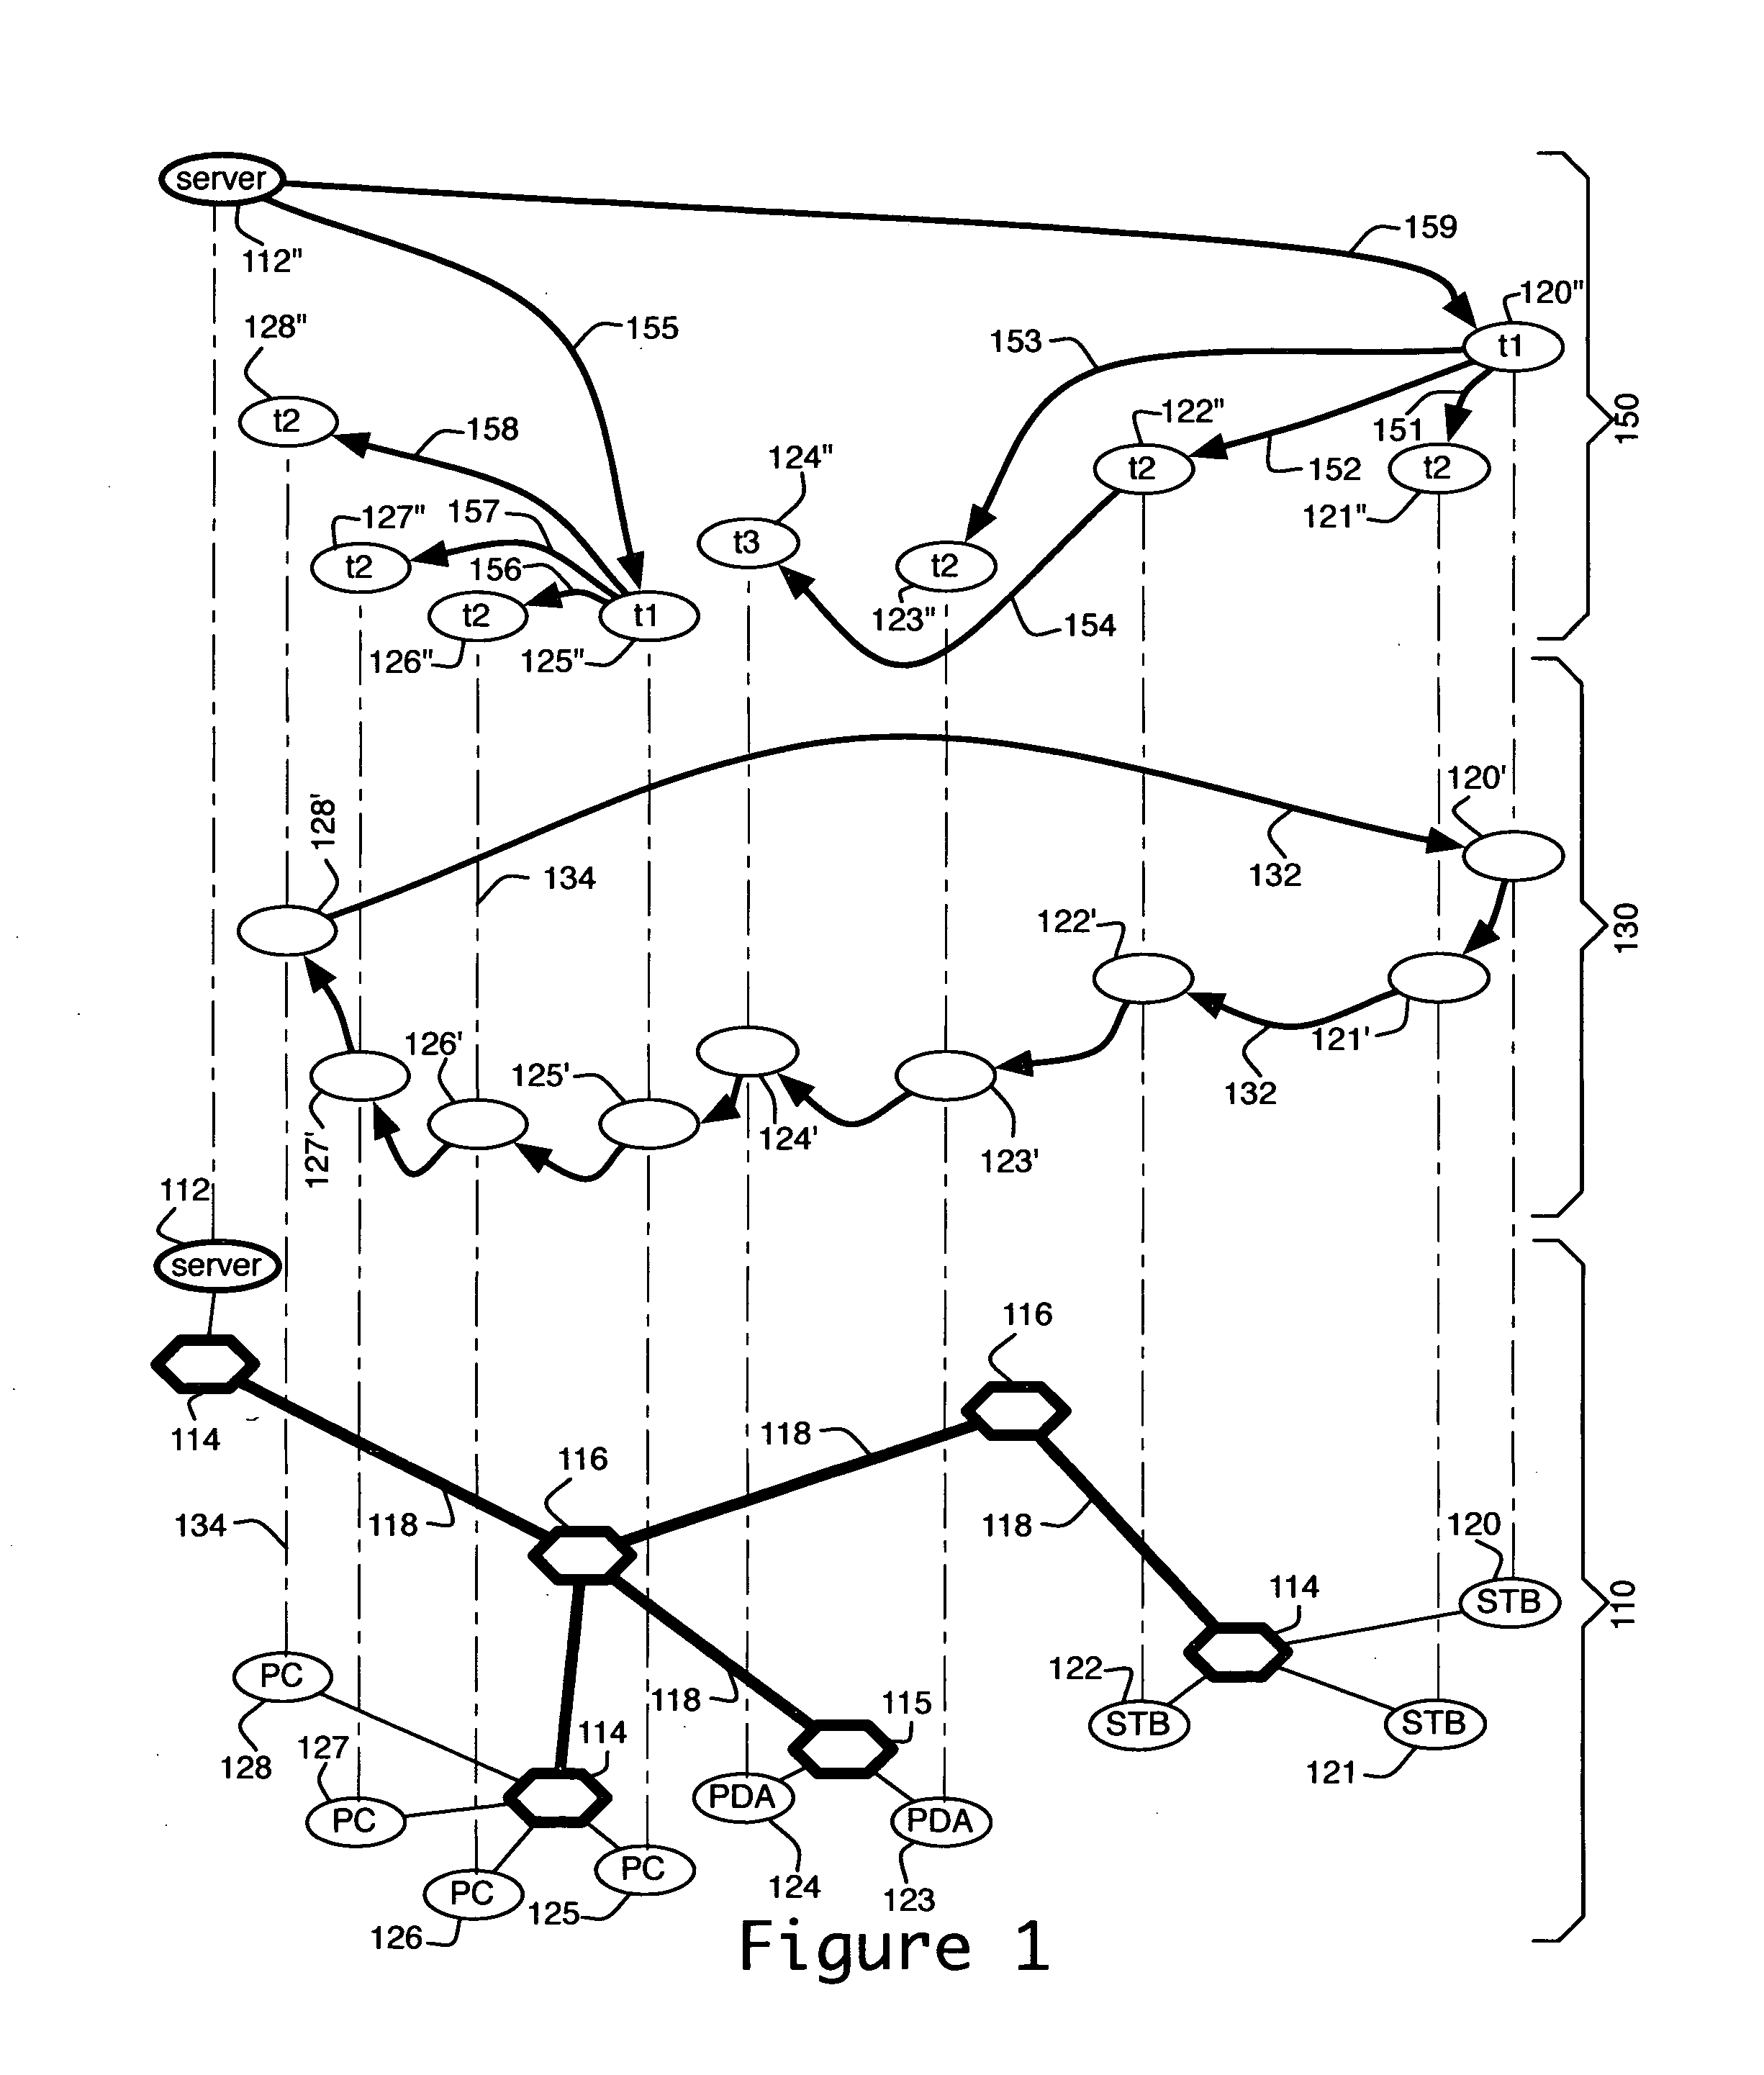 Method and apparatus for processing responses from a remote, live audience